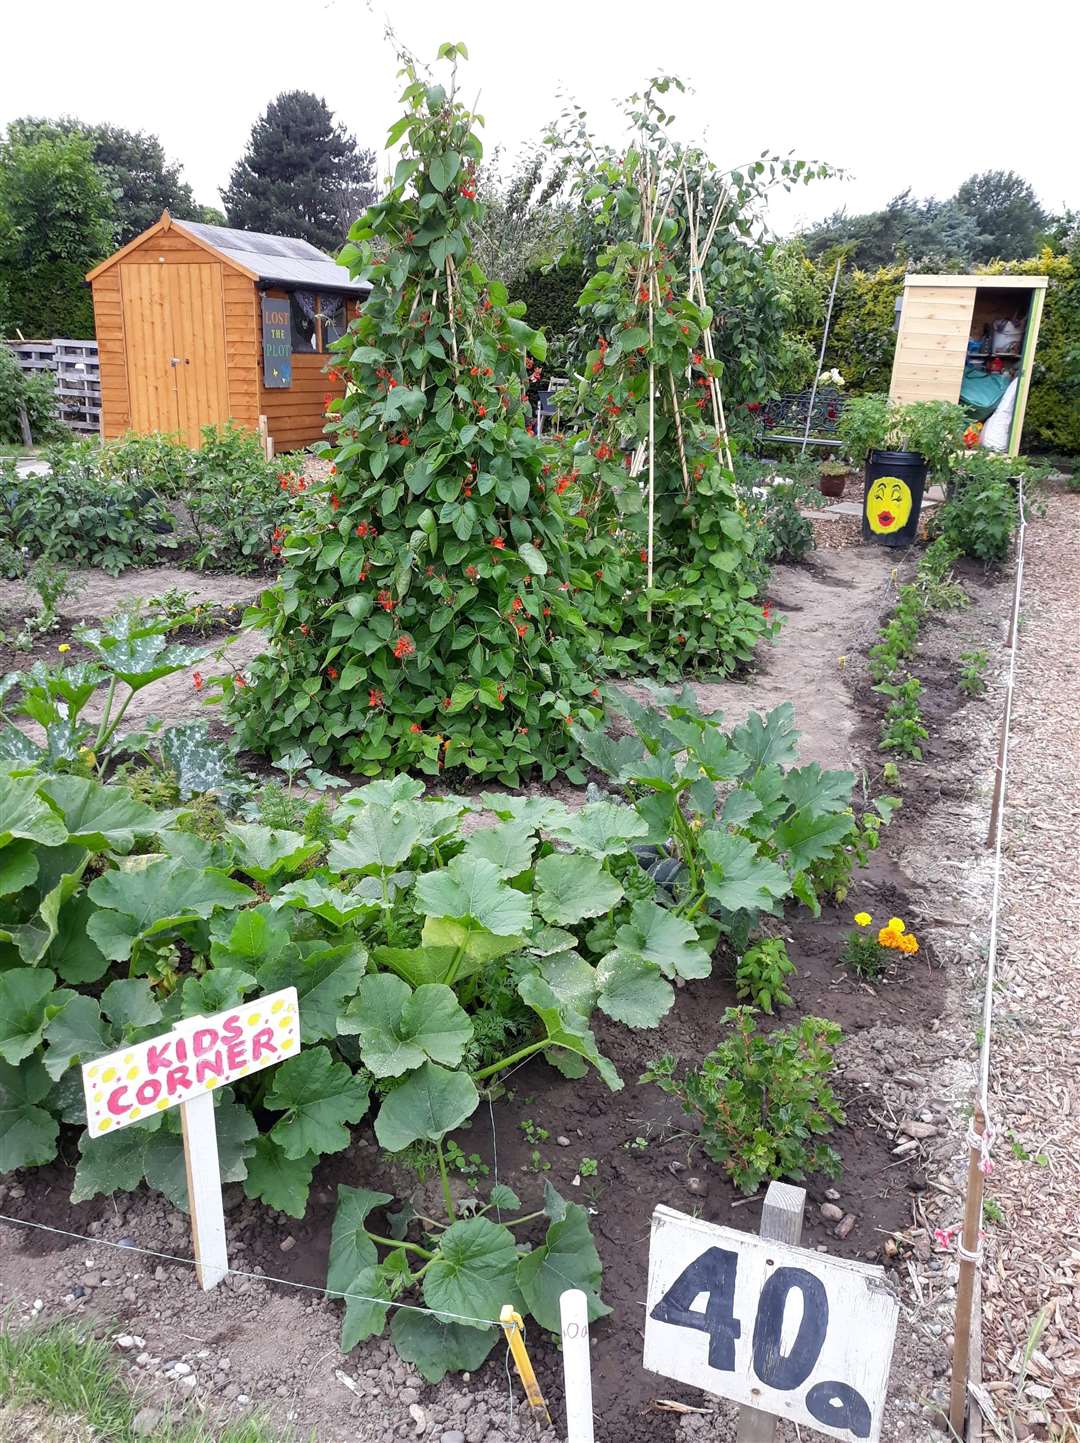 Lost the Plot is an allotment project in Telegraph Road led by mental health support group Talk It Out